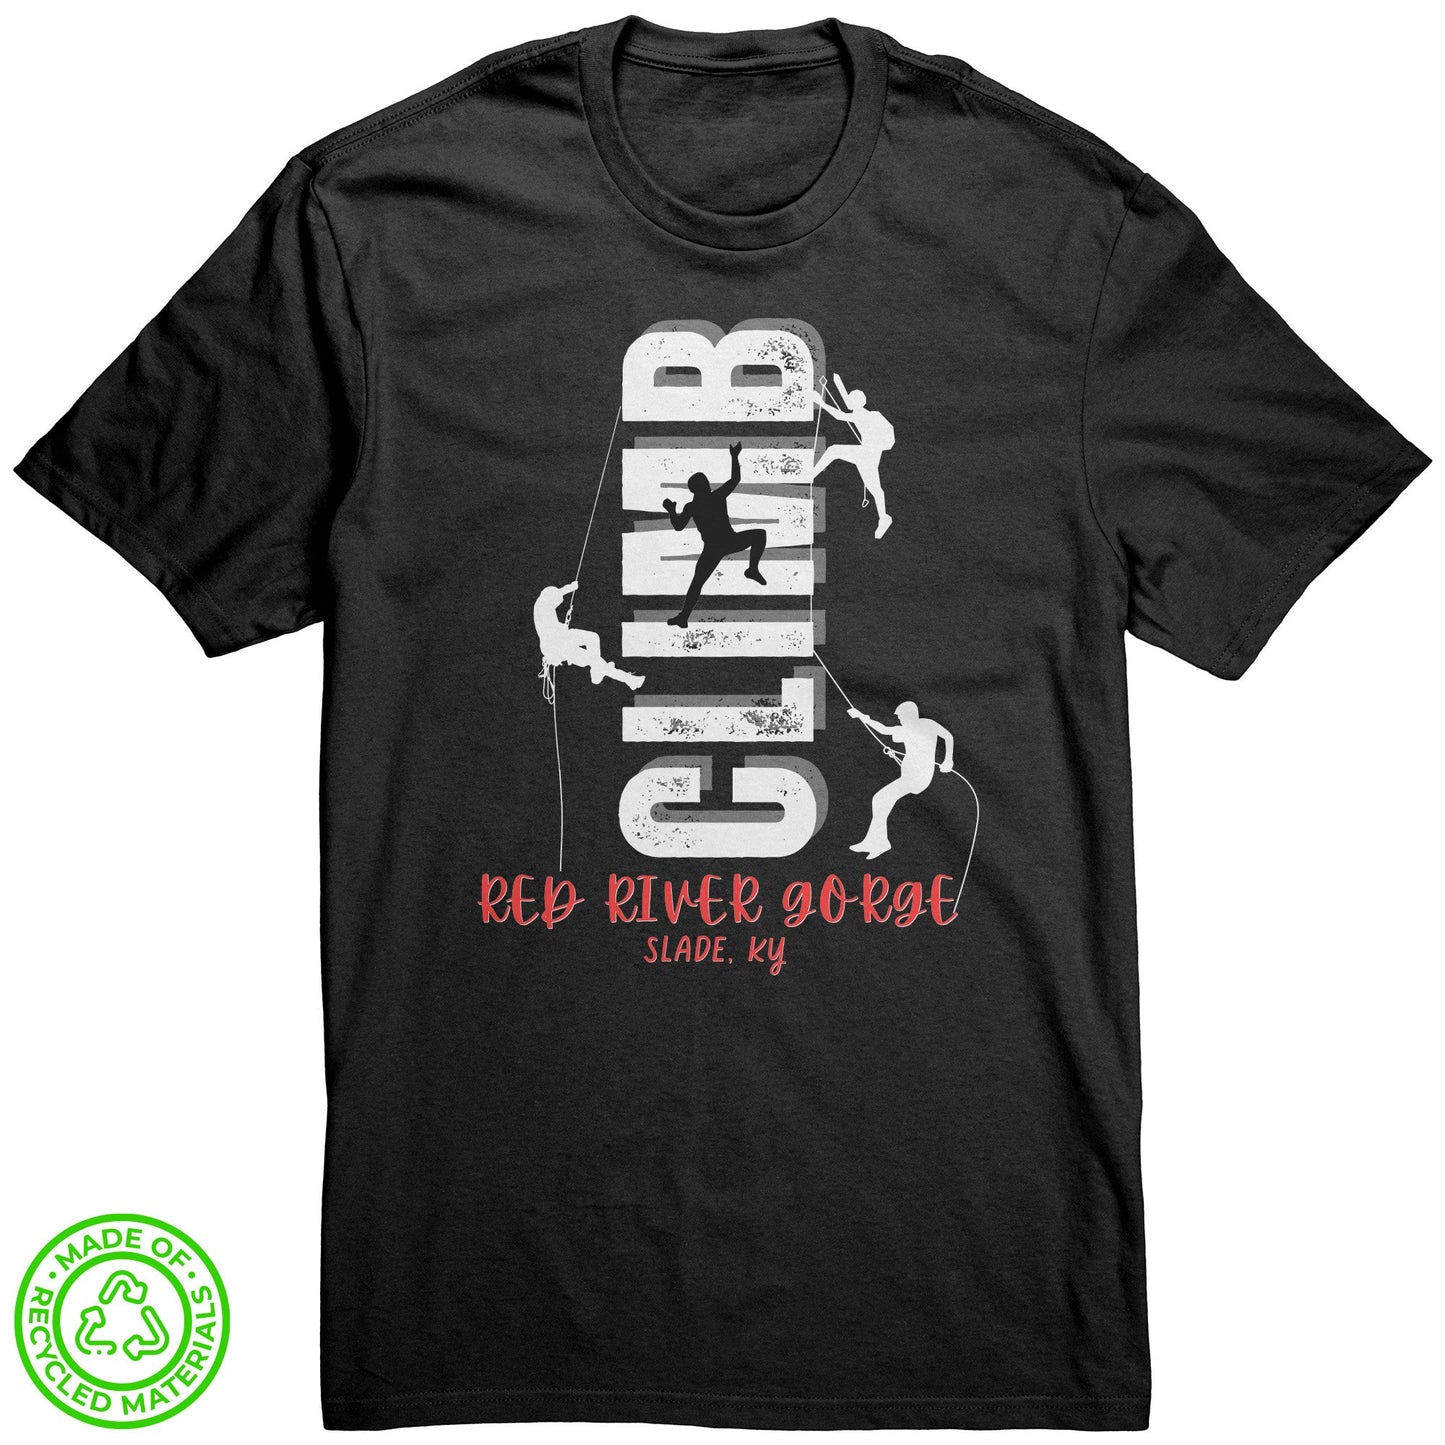 Eco-Friendly Re-Tee (CLIMB Red River Gorge)